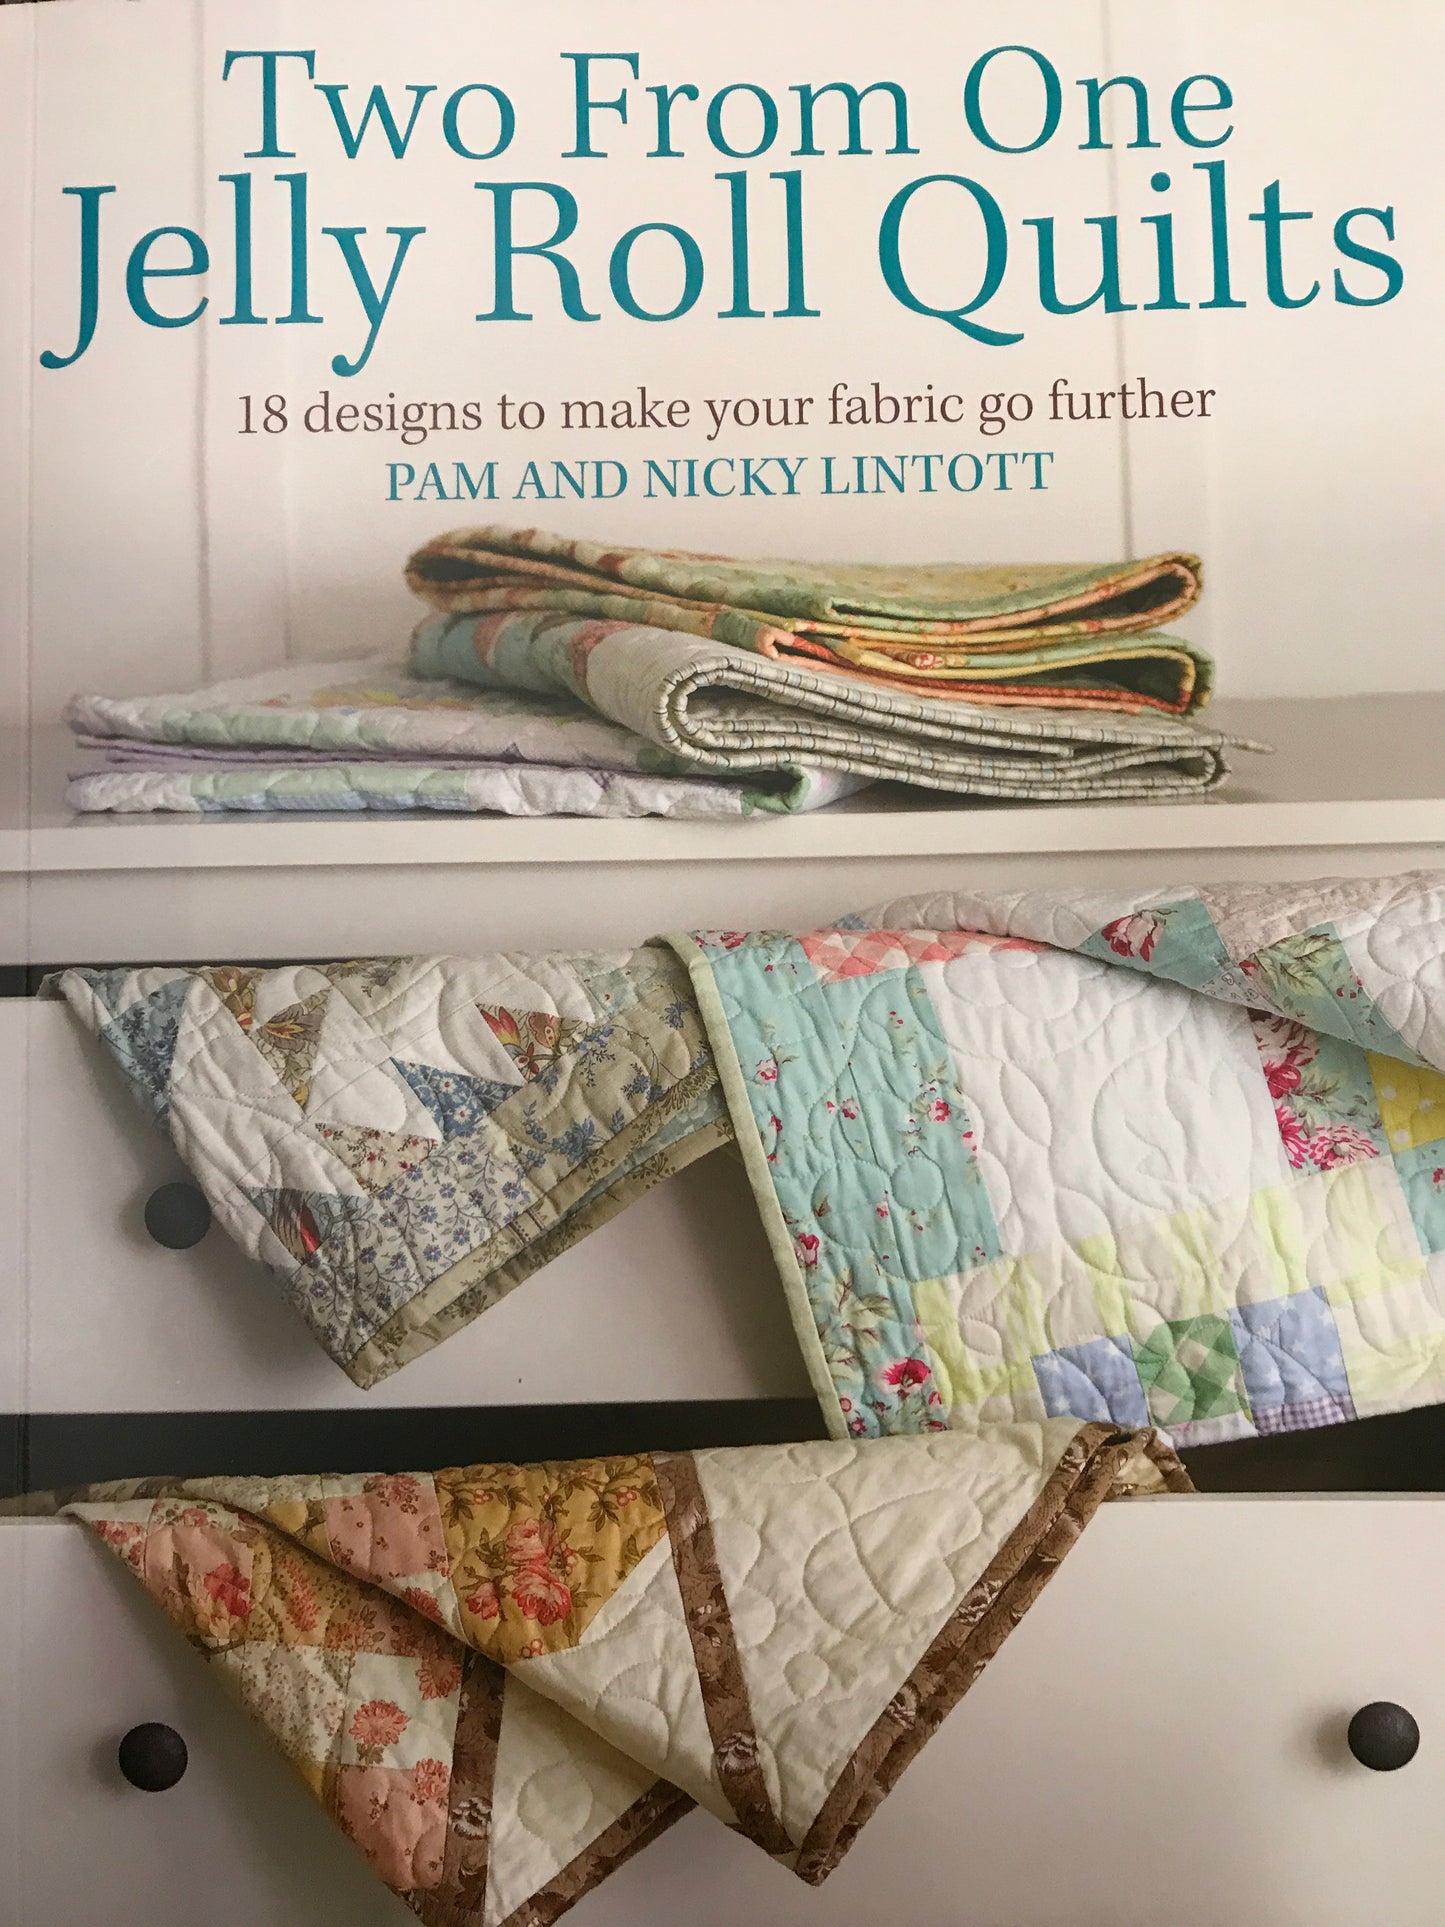 Two From One Jelly Roll Quilts by Pam and Nicky Lintott